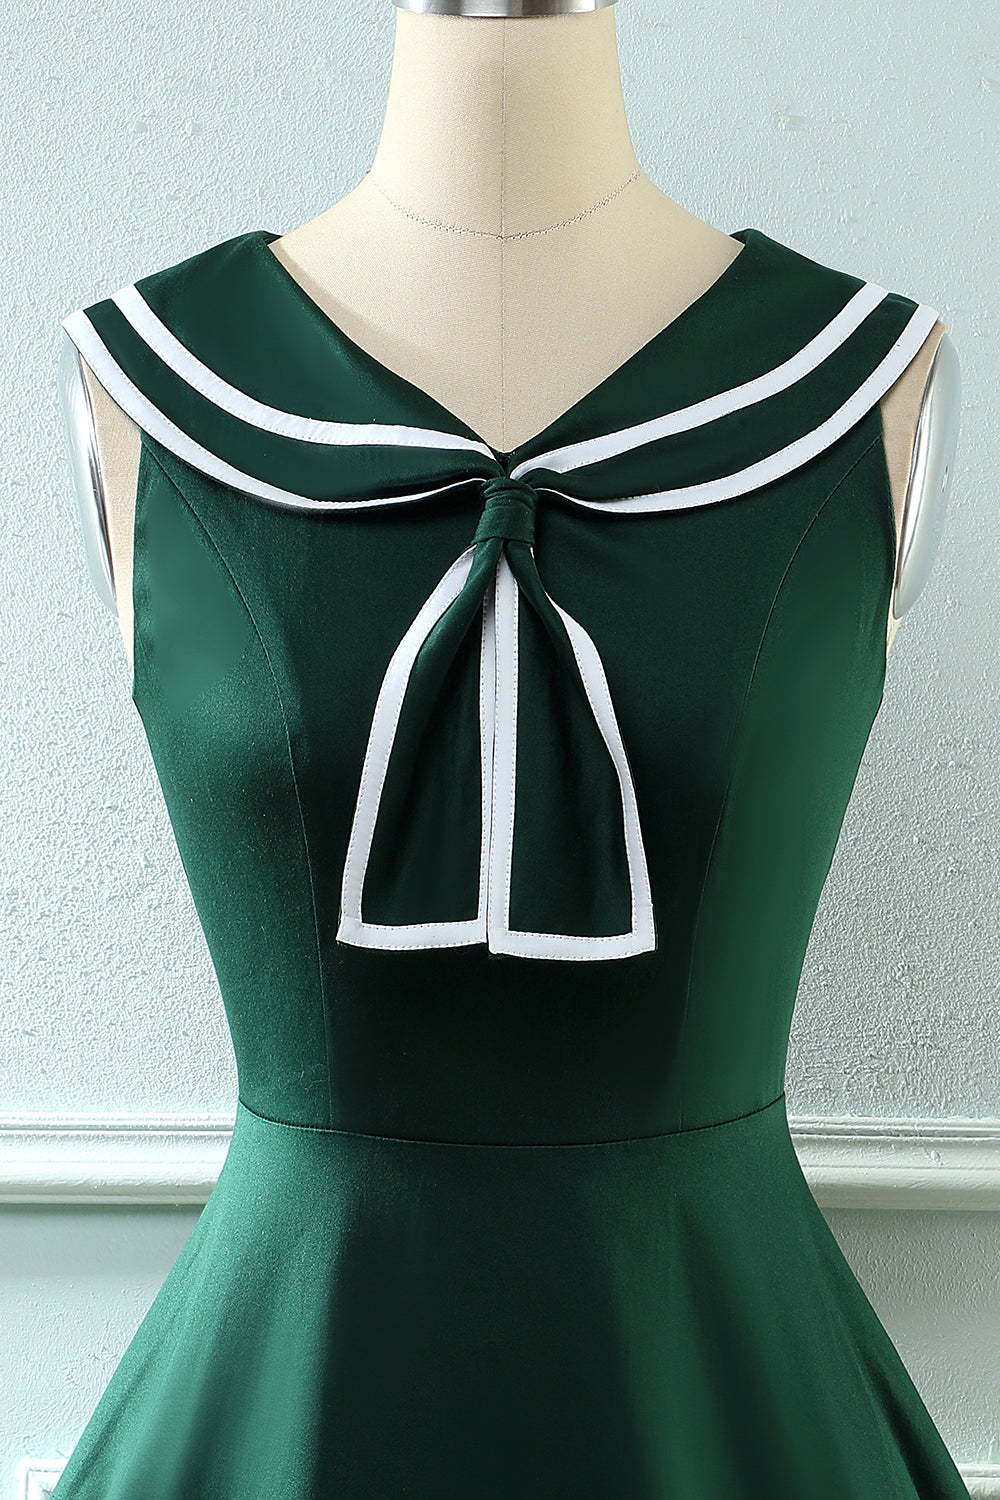 Green 1950s Dress with Tie